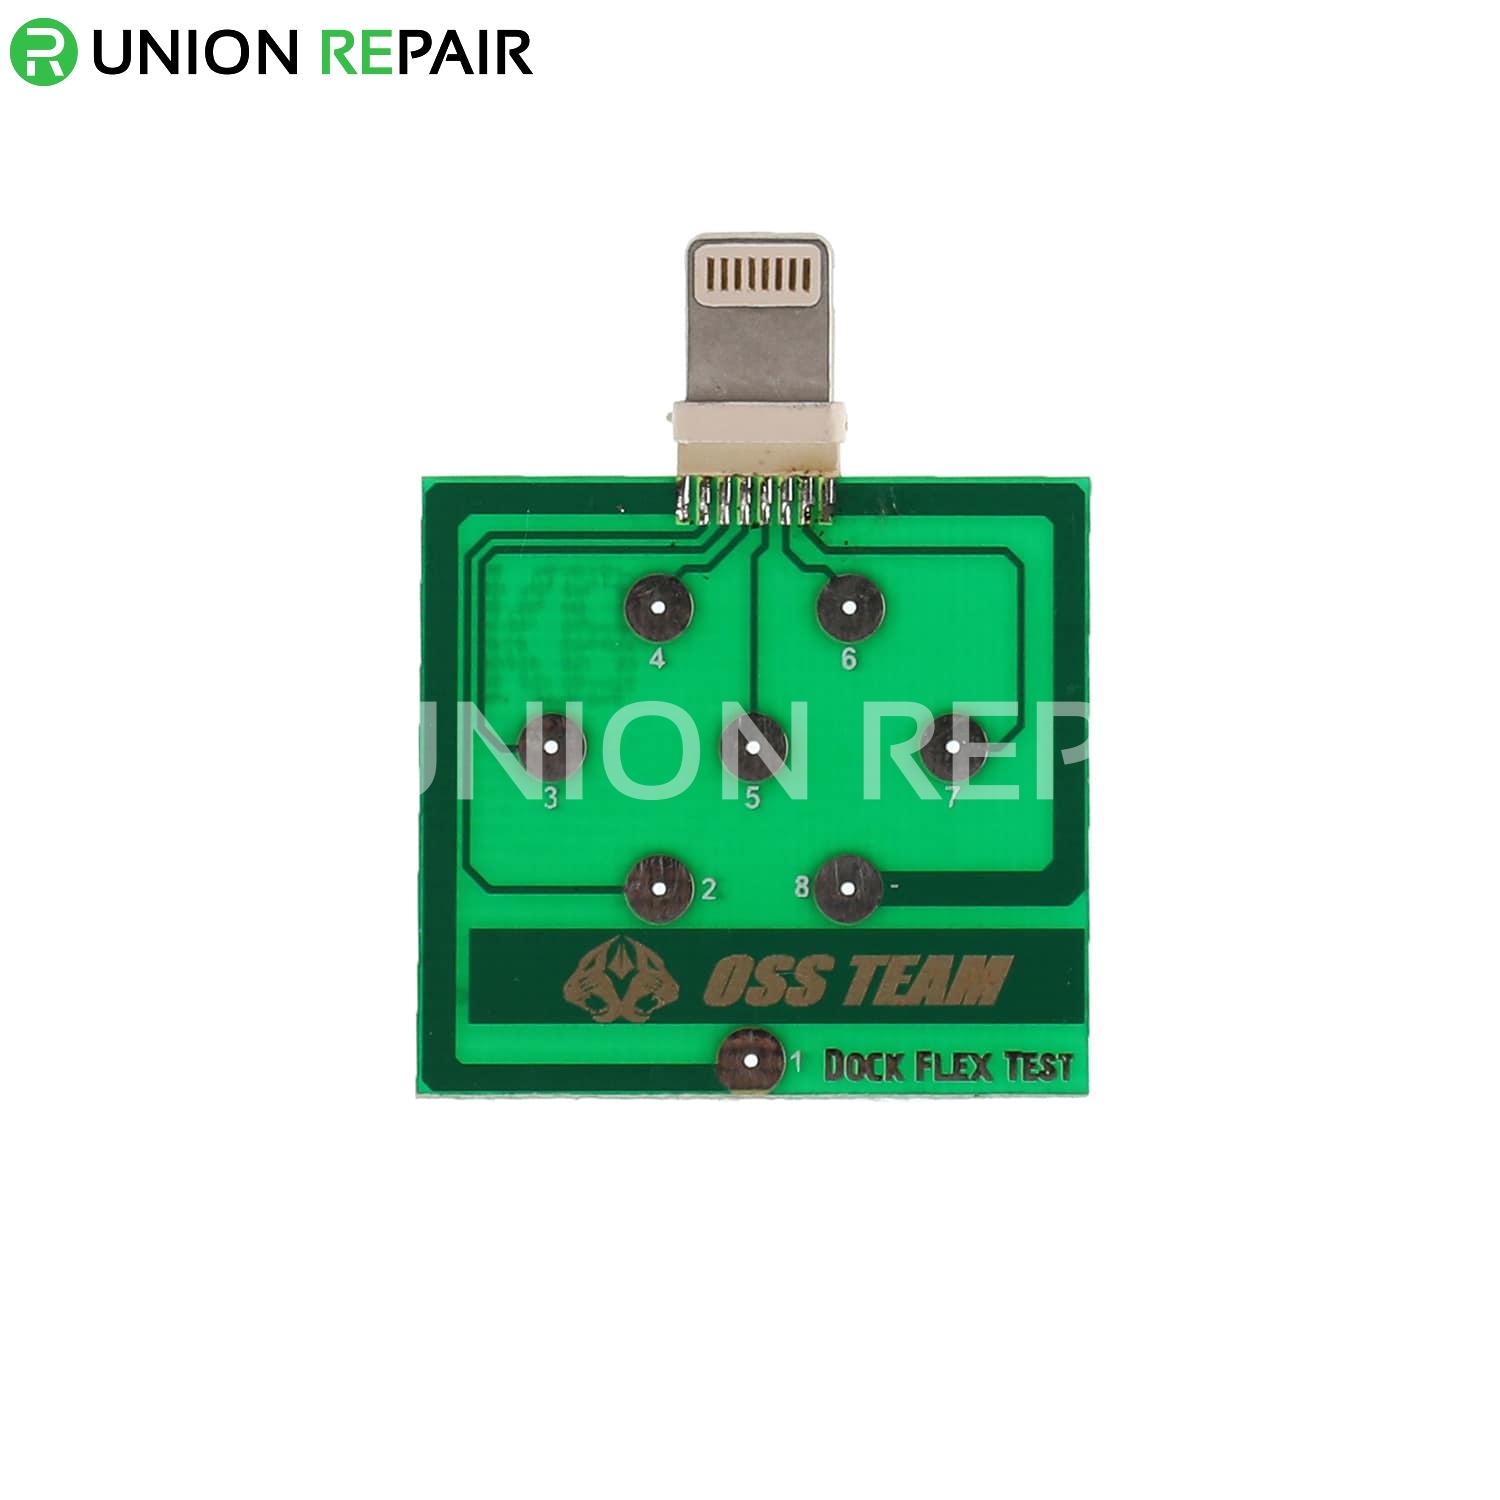 For iPhone USB Dock Pin Test Board